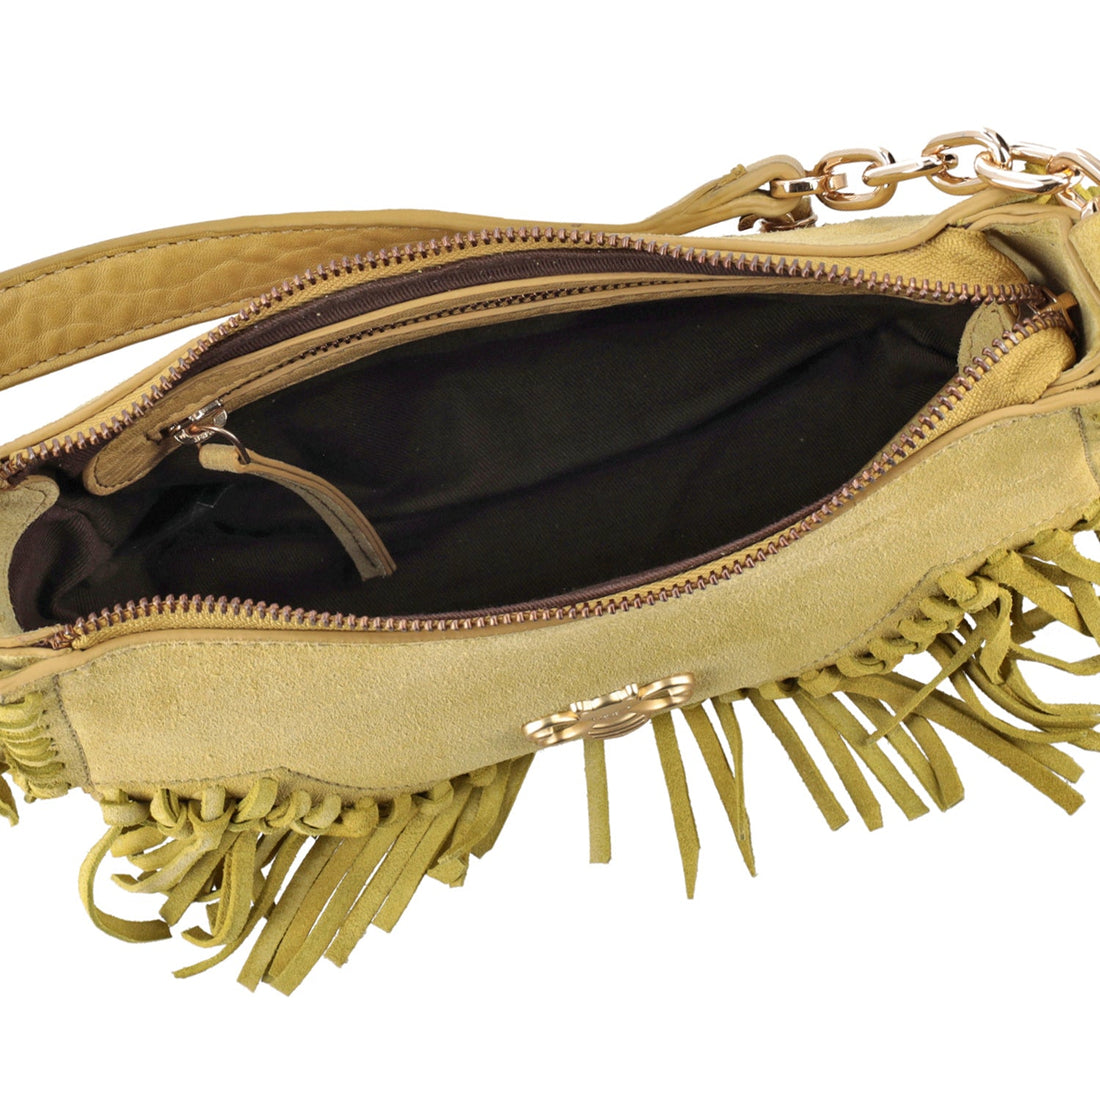 YELLOW LILIUM CROSSBODY BAG IN SUEDE WITH FRINGES